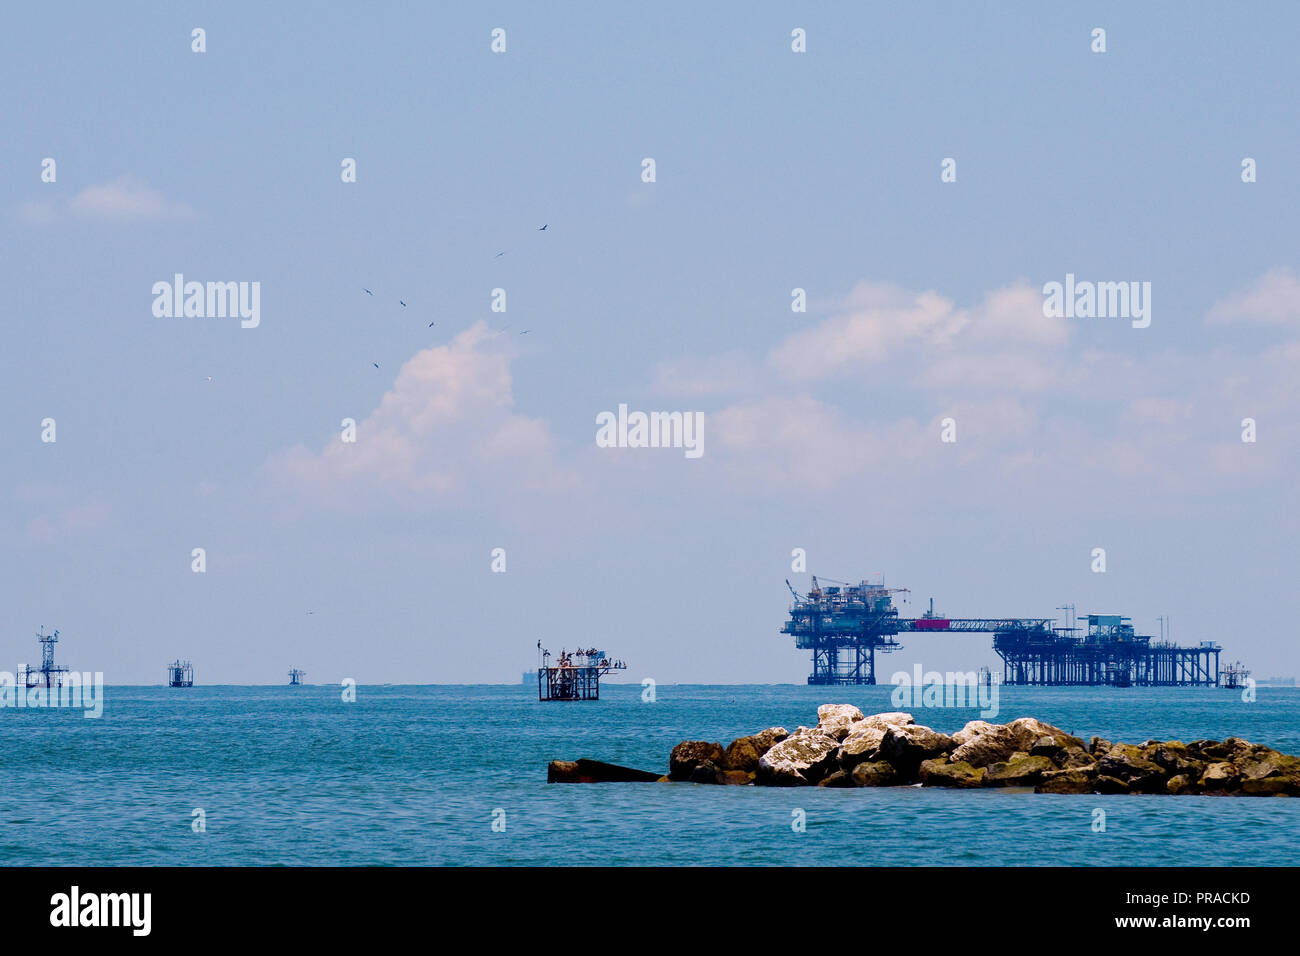 2010 - Oil production platforms in Gulf of Mexico Stock Photo